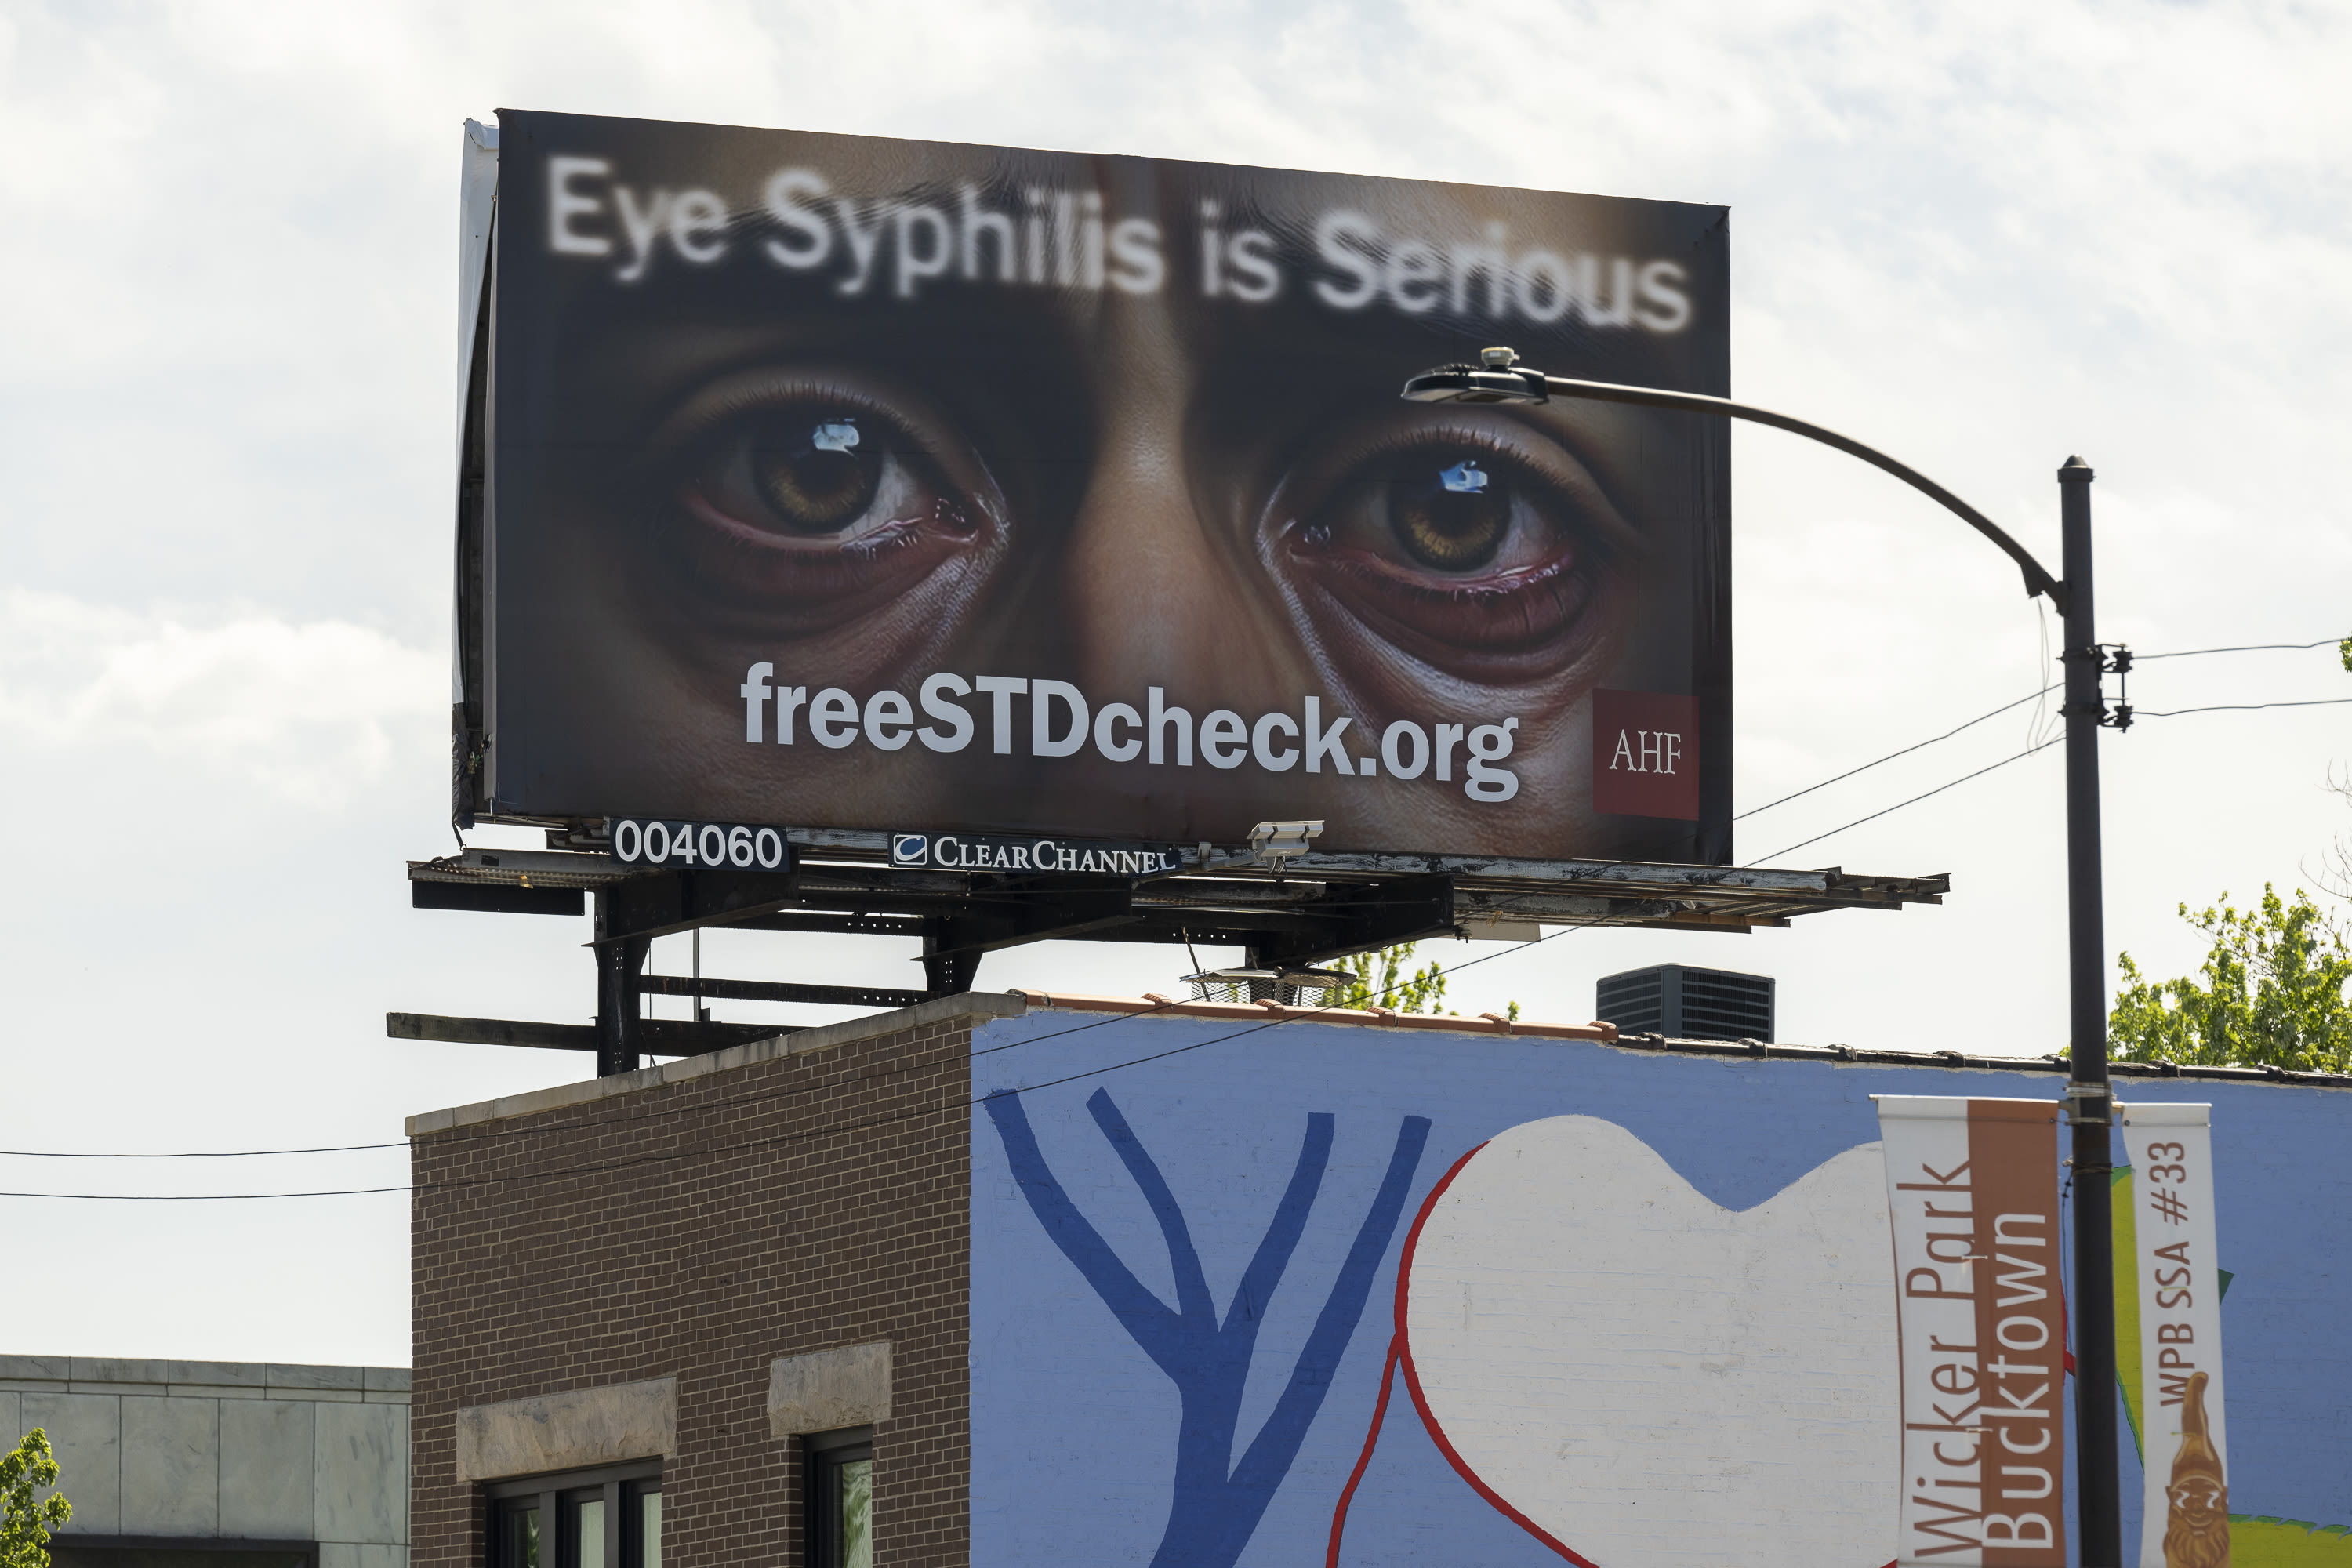 Rare and acute syphilis symptoms increasingly appearing in Chicago patients, study says